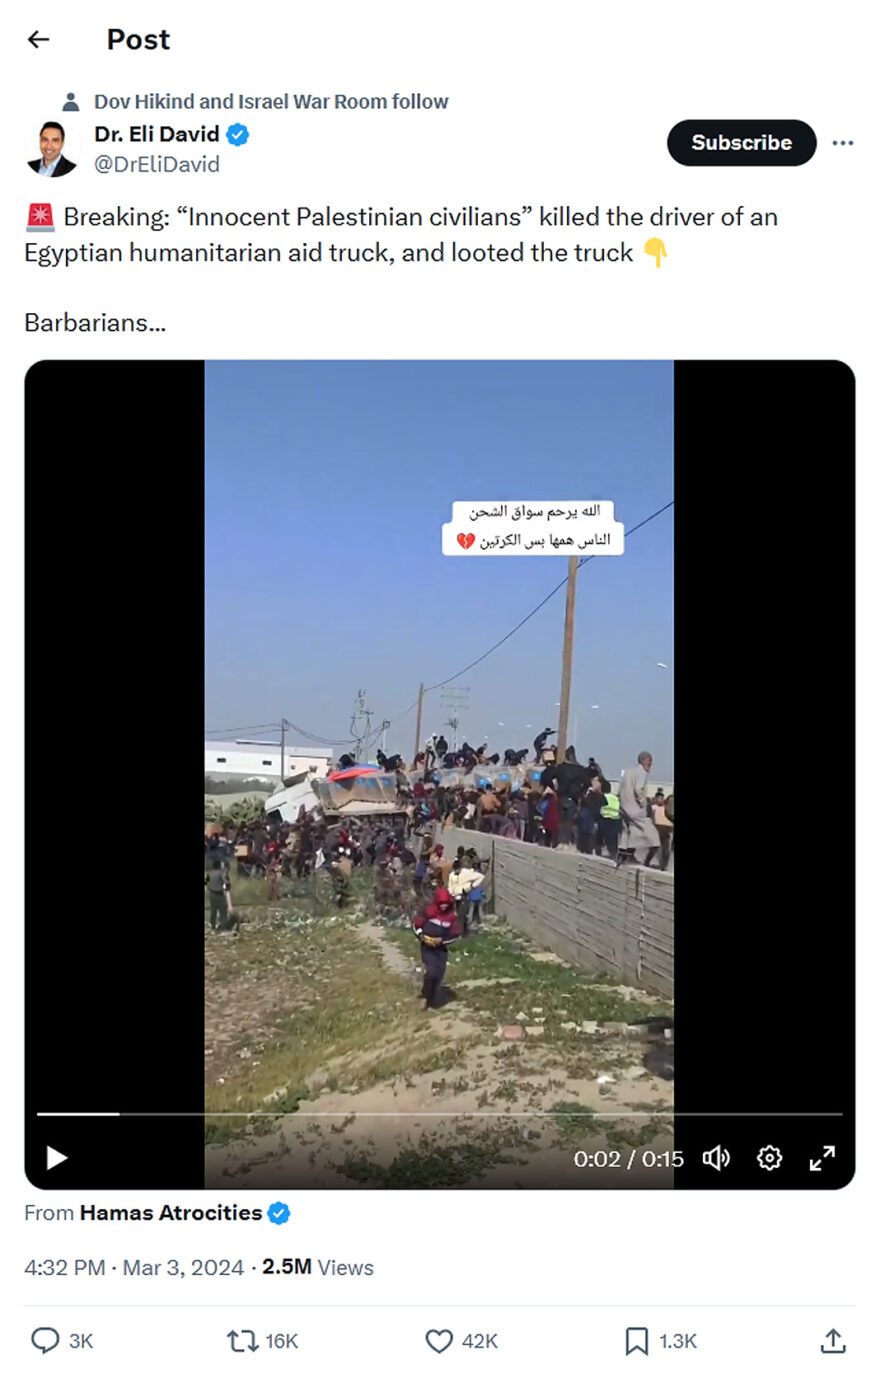 Dr. Eli David-tweet-3March2024-Innocent Palestinian civilians killed the driver of an Egyptian humanitarian aid truck